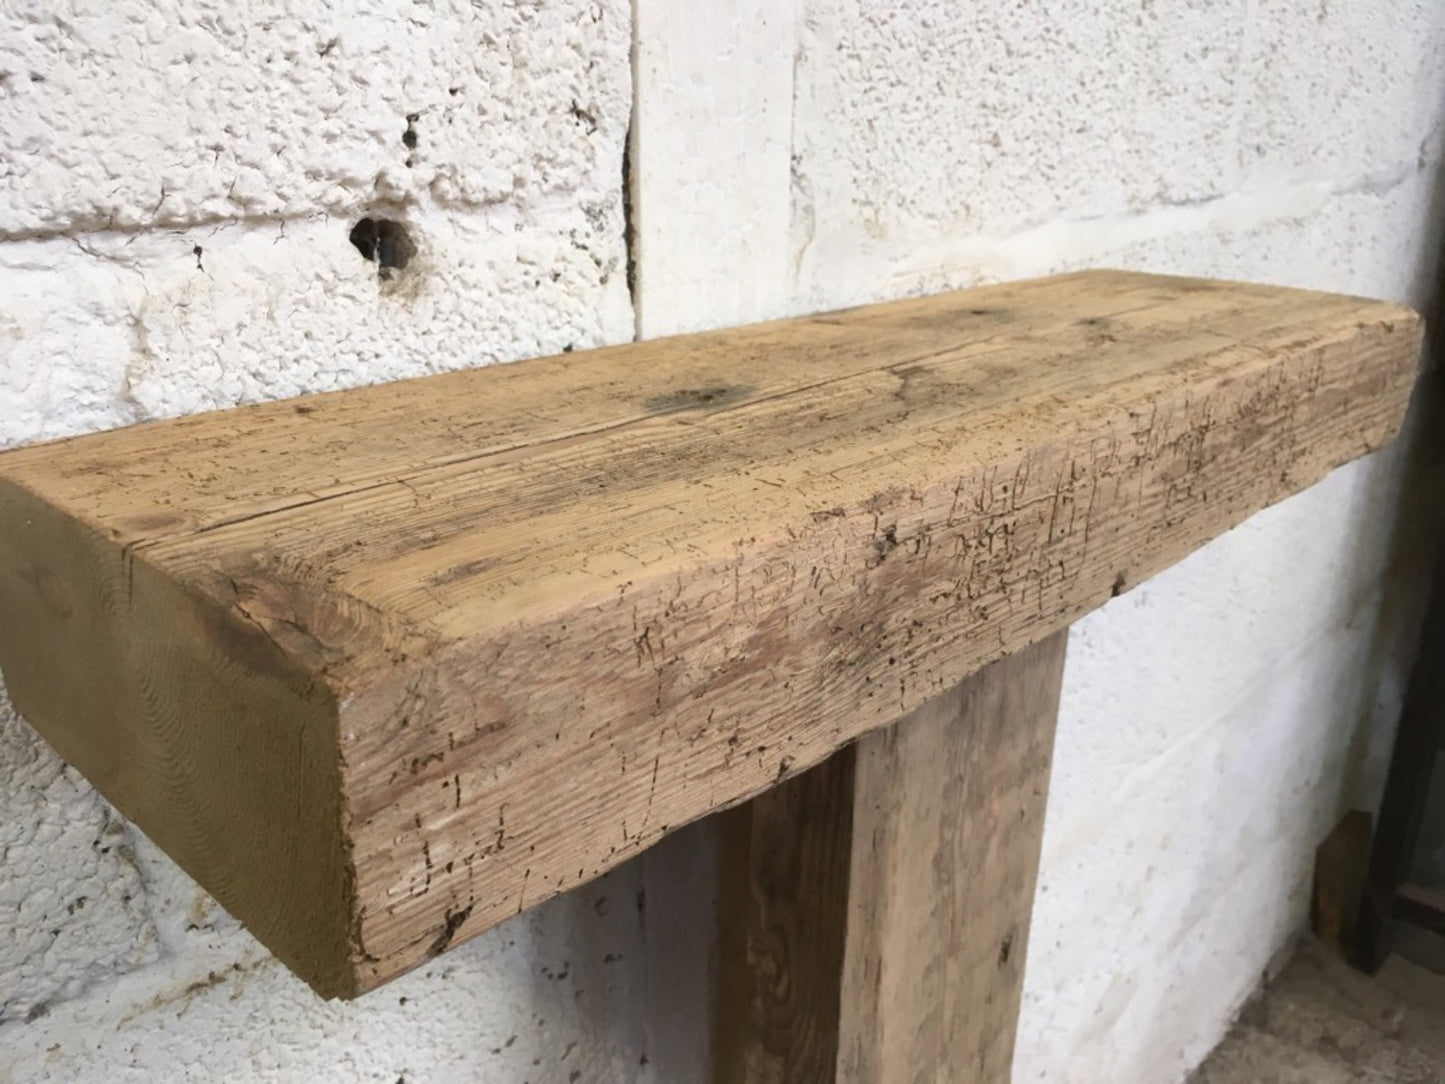 2ft Or 61cm Long By 7” Old Reclaimed Rustic Pine Mantle Shelf Wormy Shelf